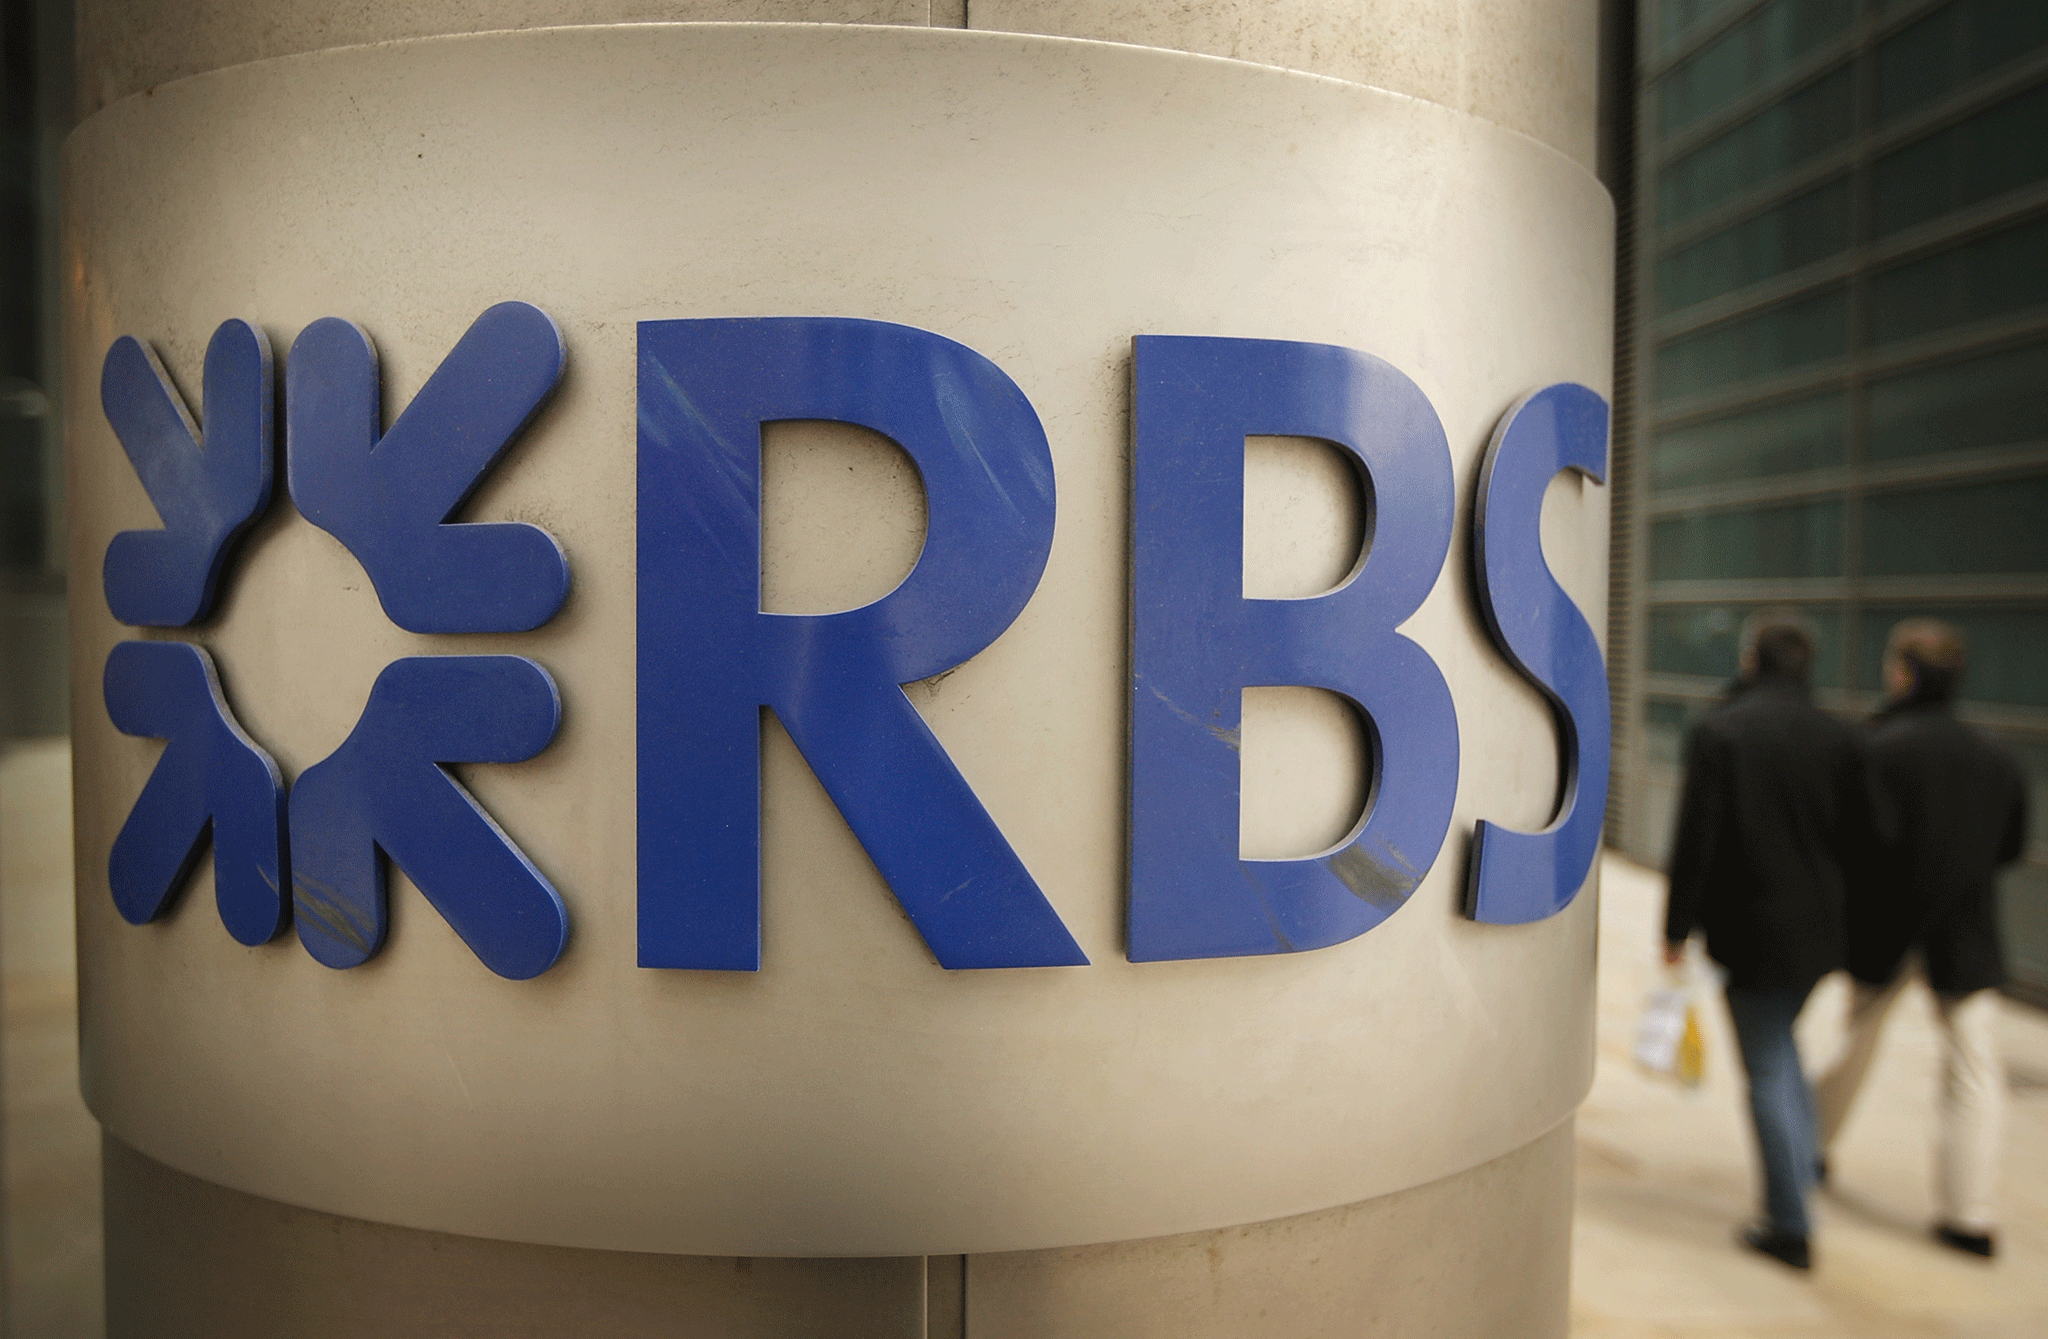 RBS was bailed out with £45bn of public money at the height of the financial crisis in 2008